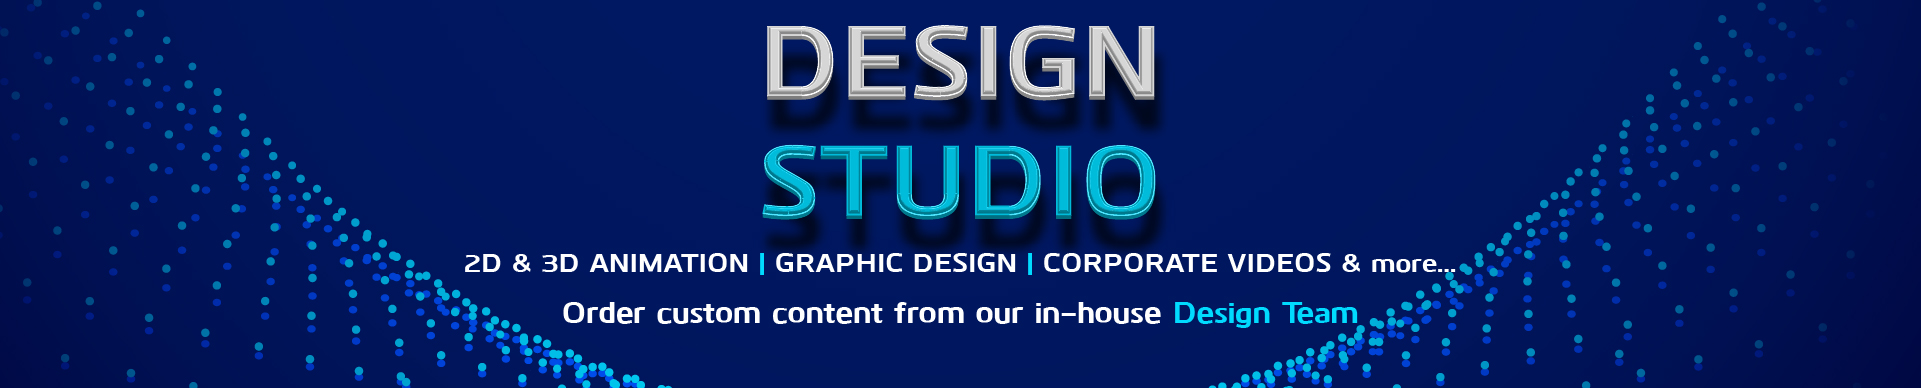 Design Studio includes 2D & 3D Animation, Graphic Design, corporate videos, Architectural walkthrough, Motion and Content orders